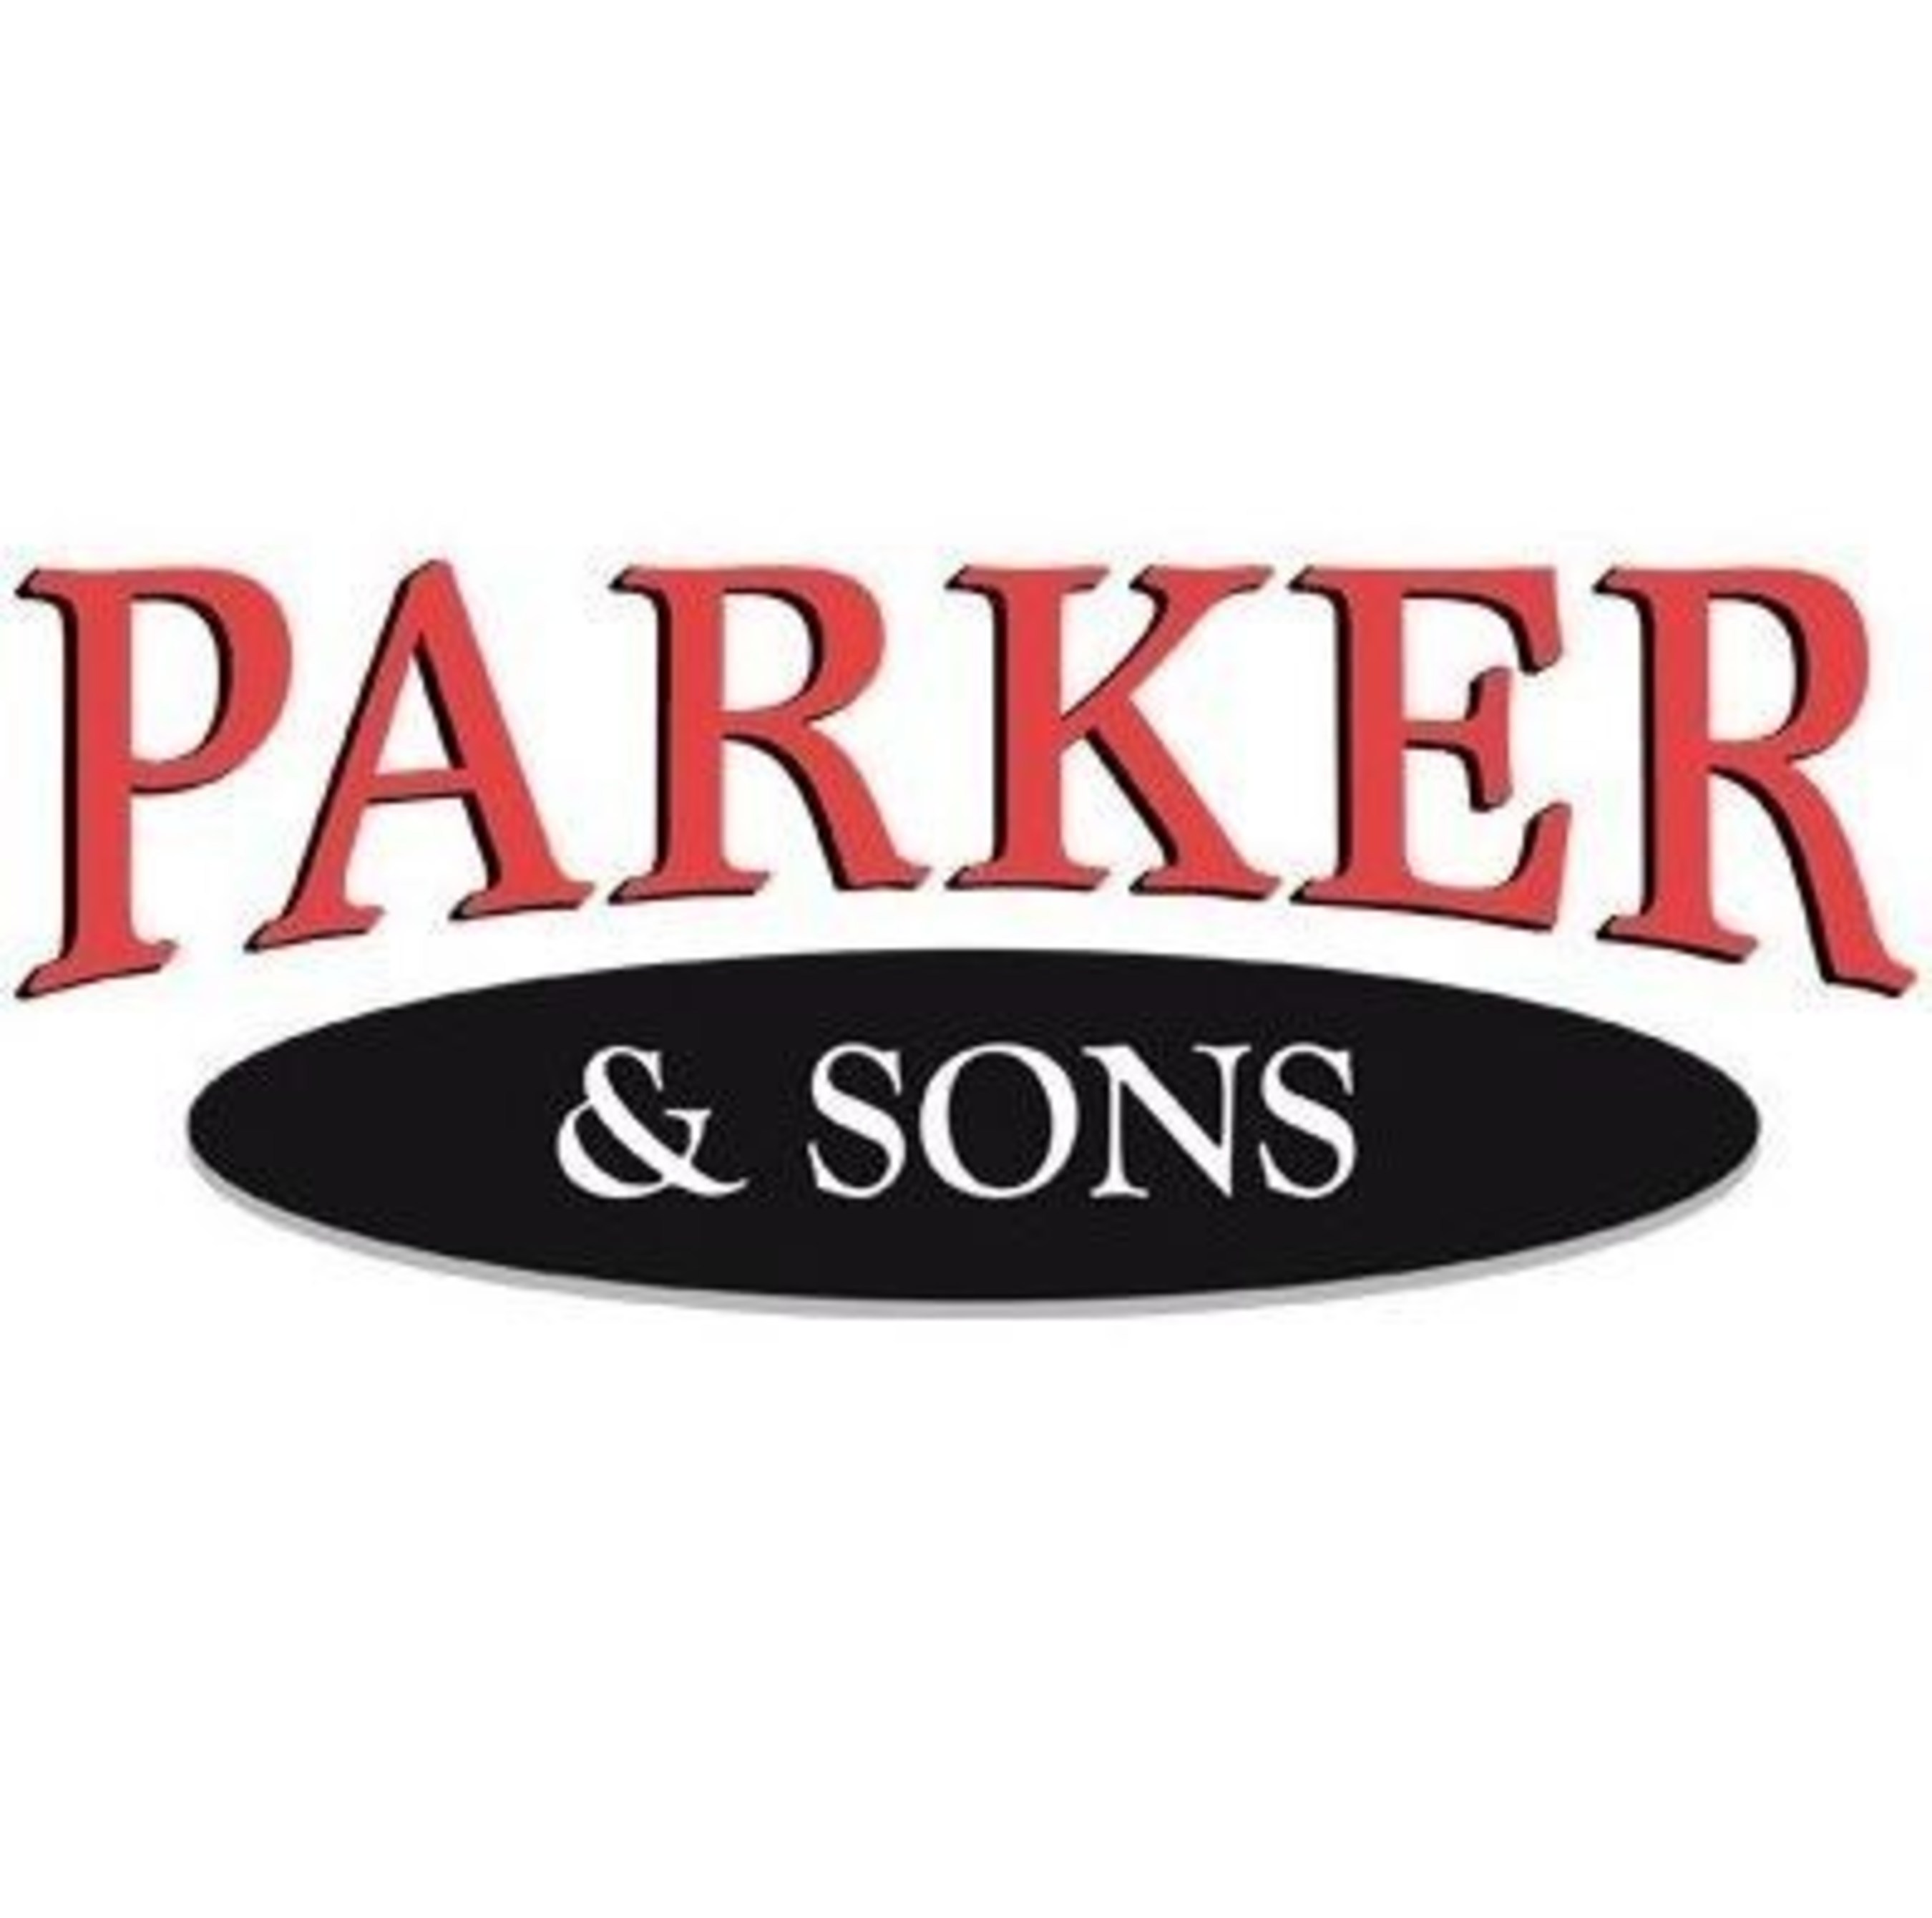 Parker and Sons Offers Advice for Child Protection